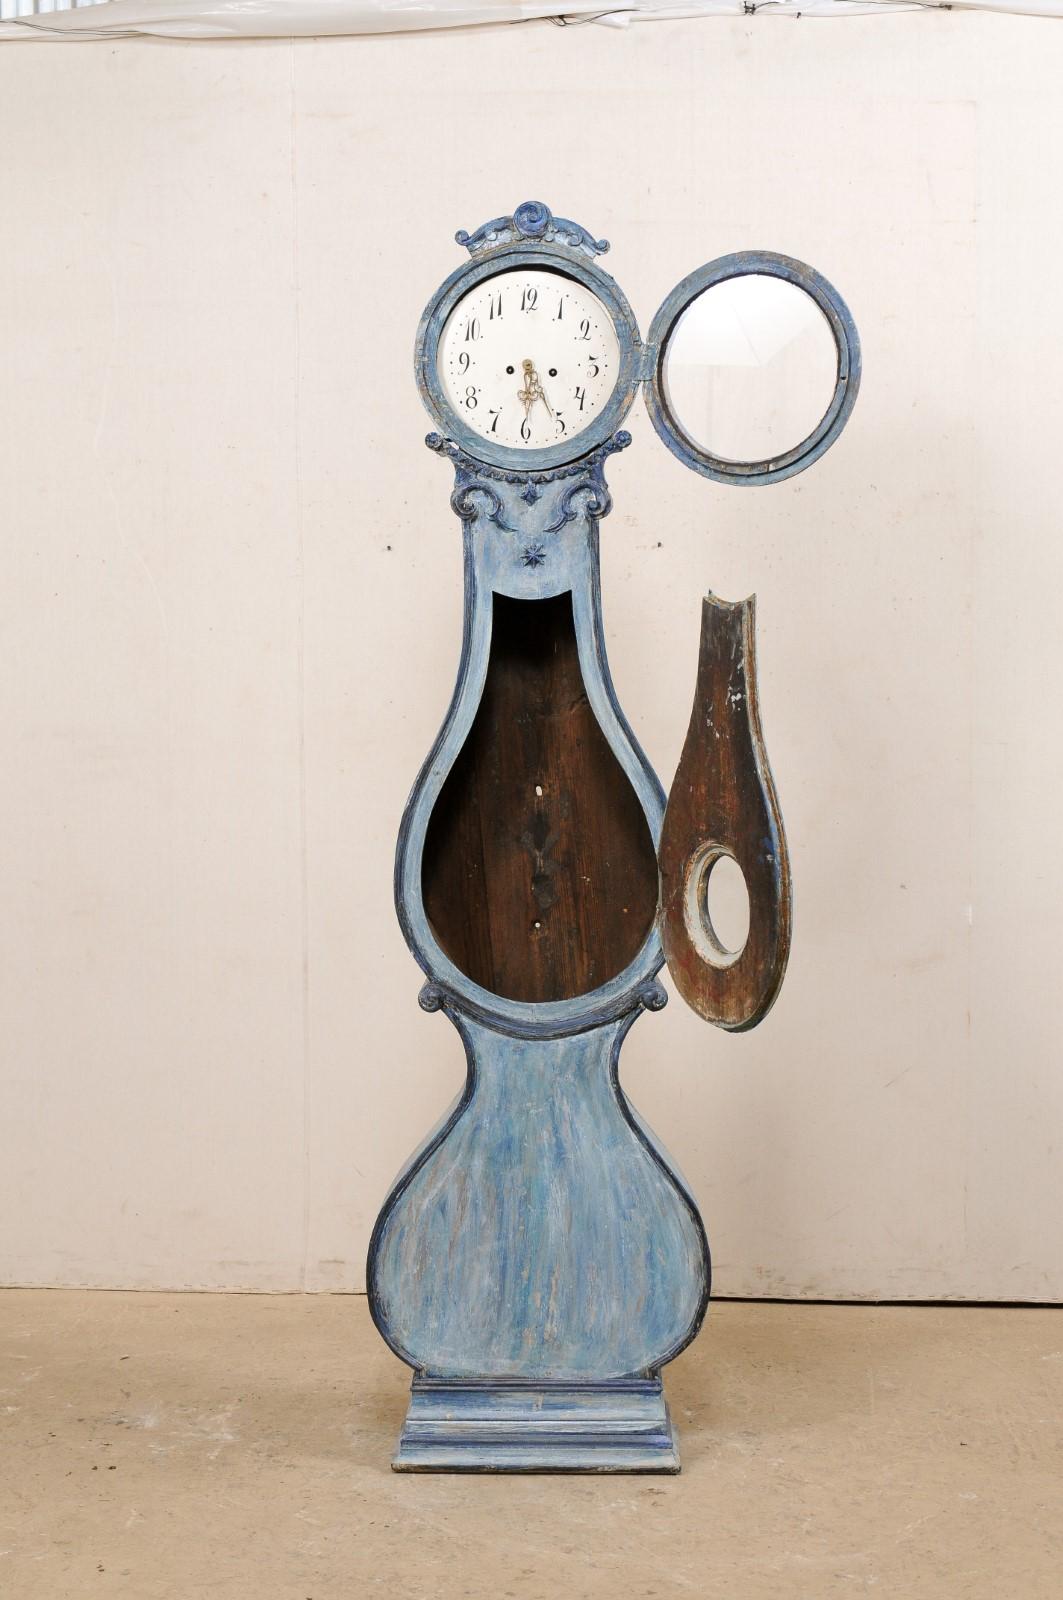 Wood Antique Swedish Fryksdahl Grandfather Clock w/Shapely Body in Blue Hues